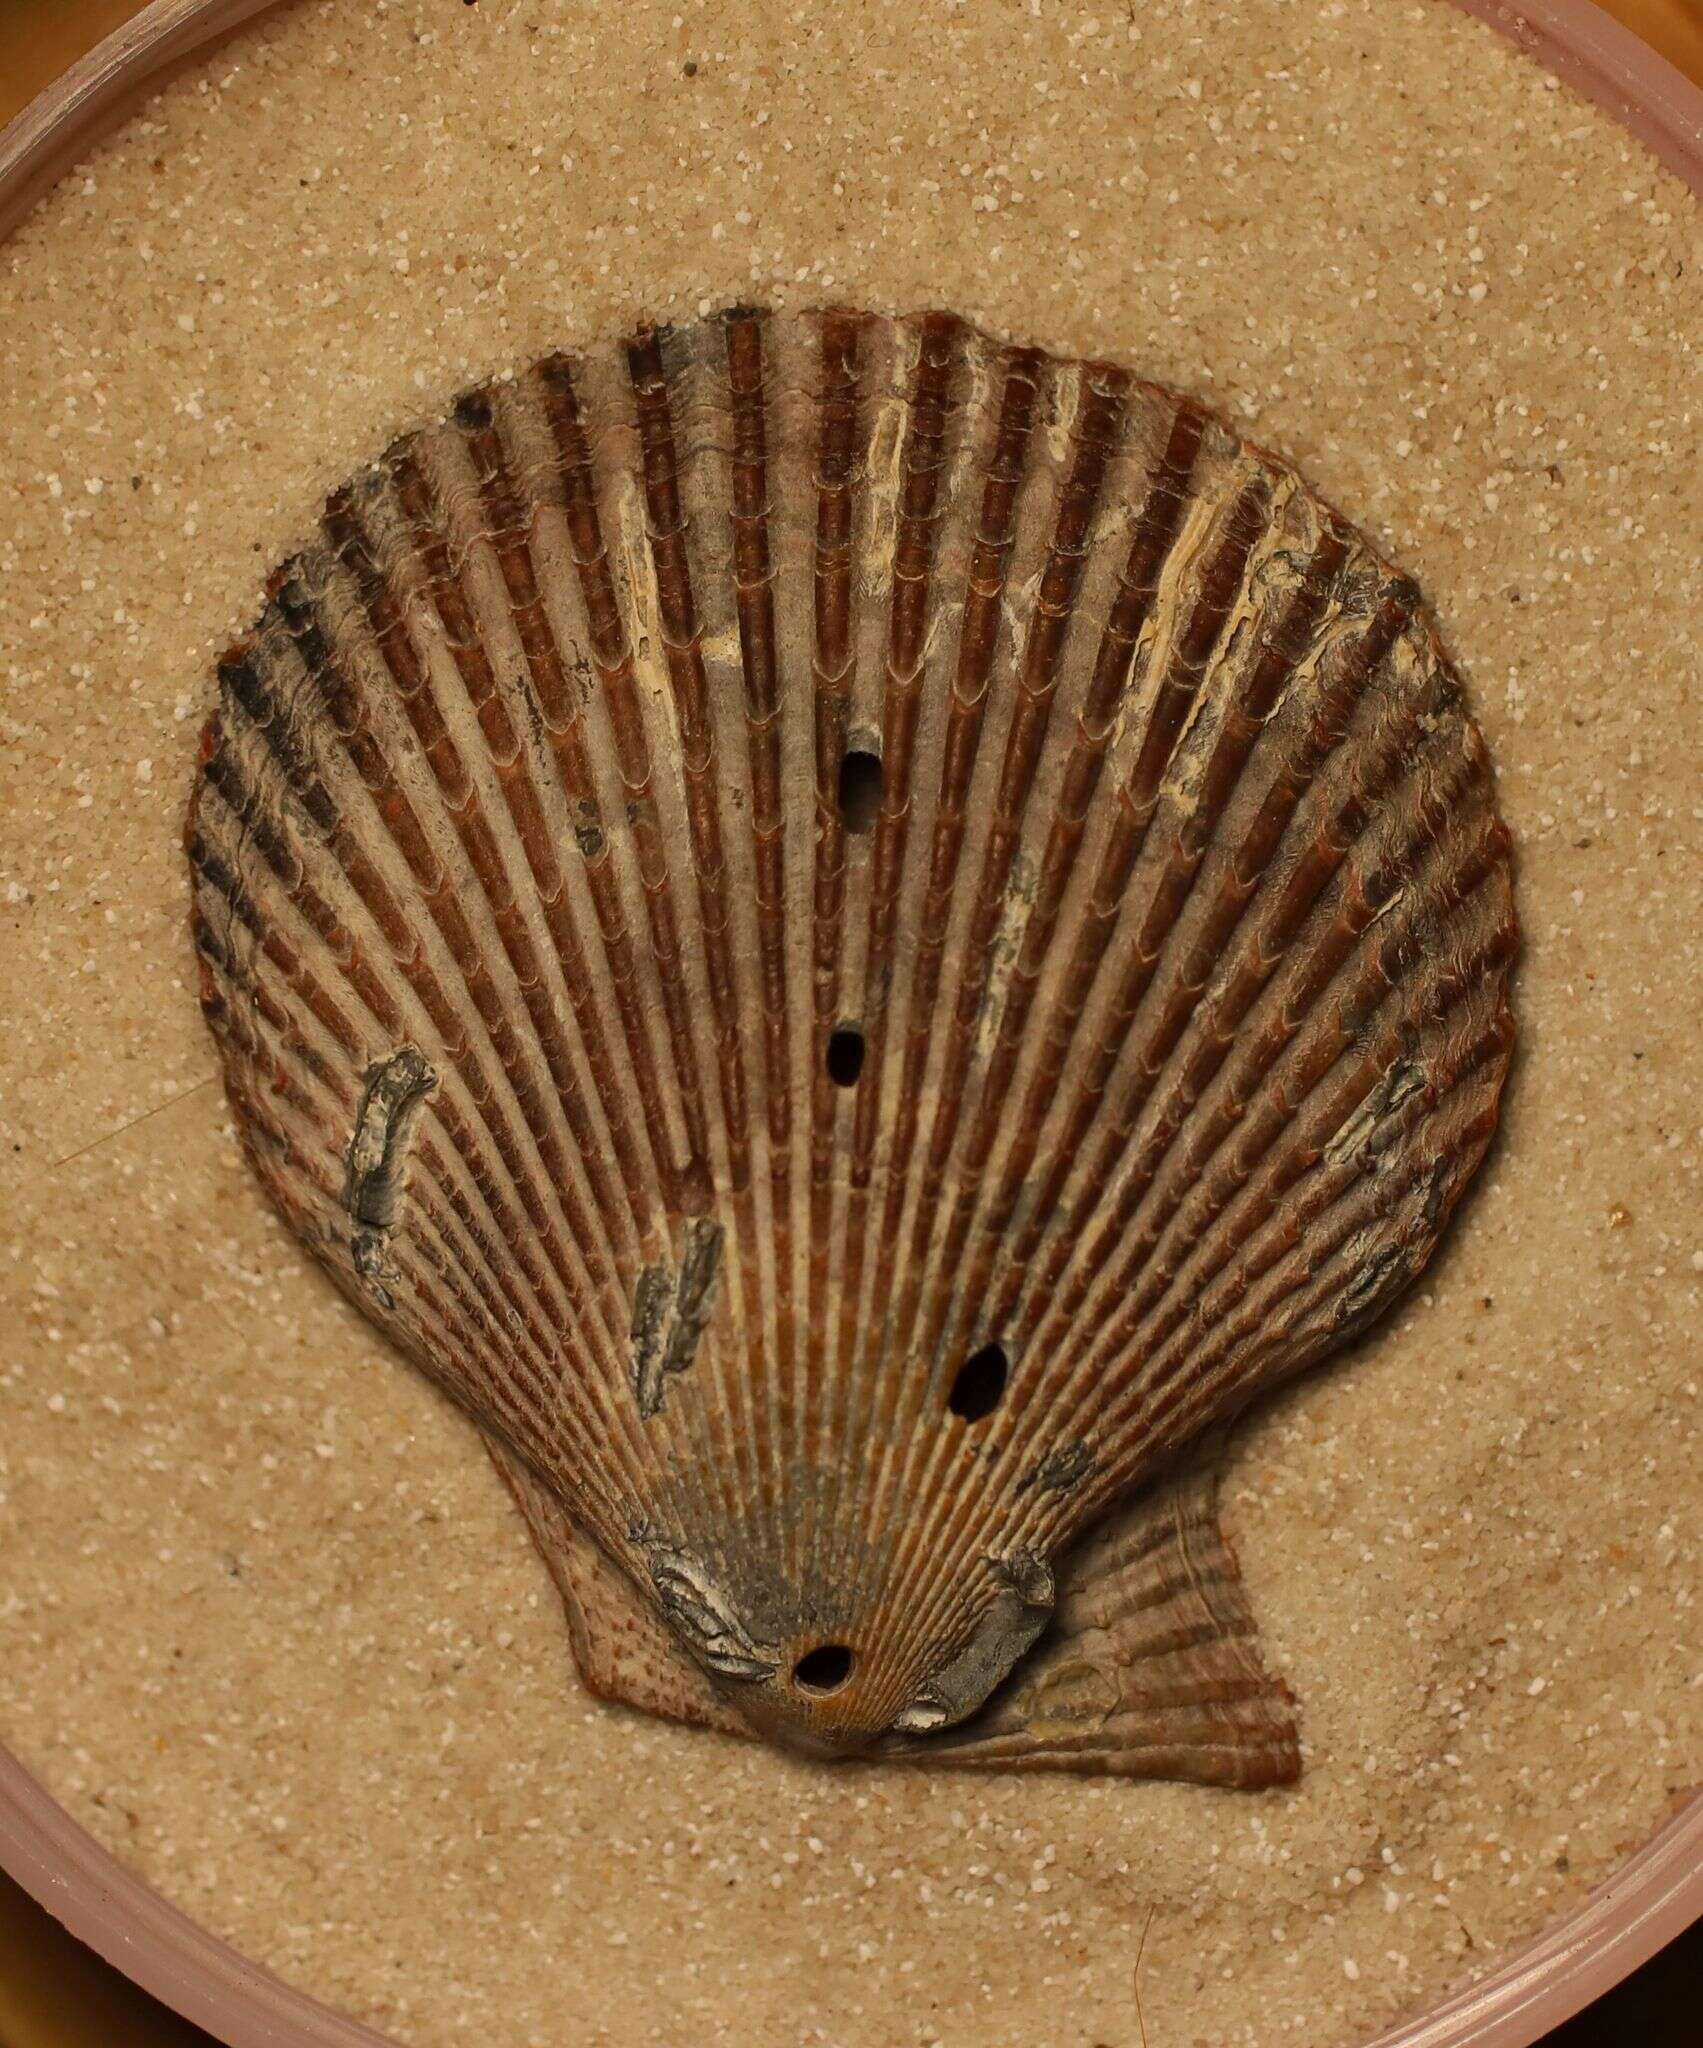 Image of variegated scallop